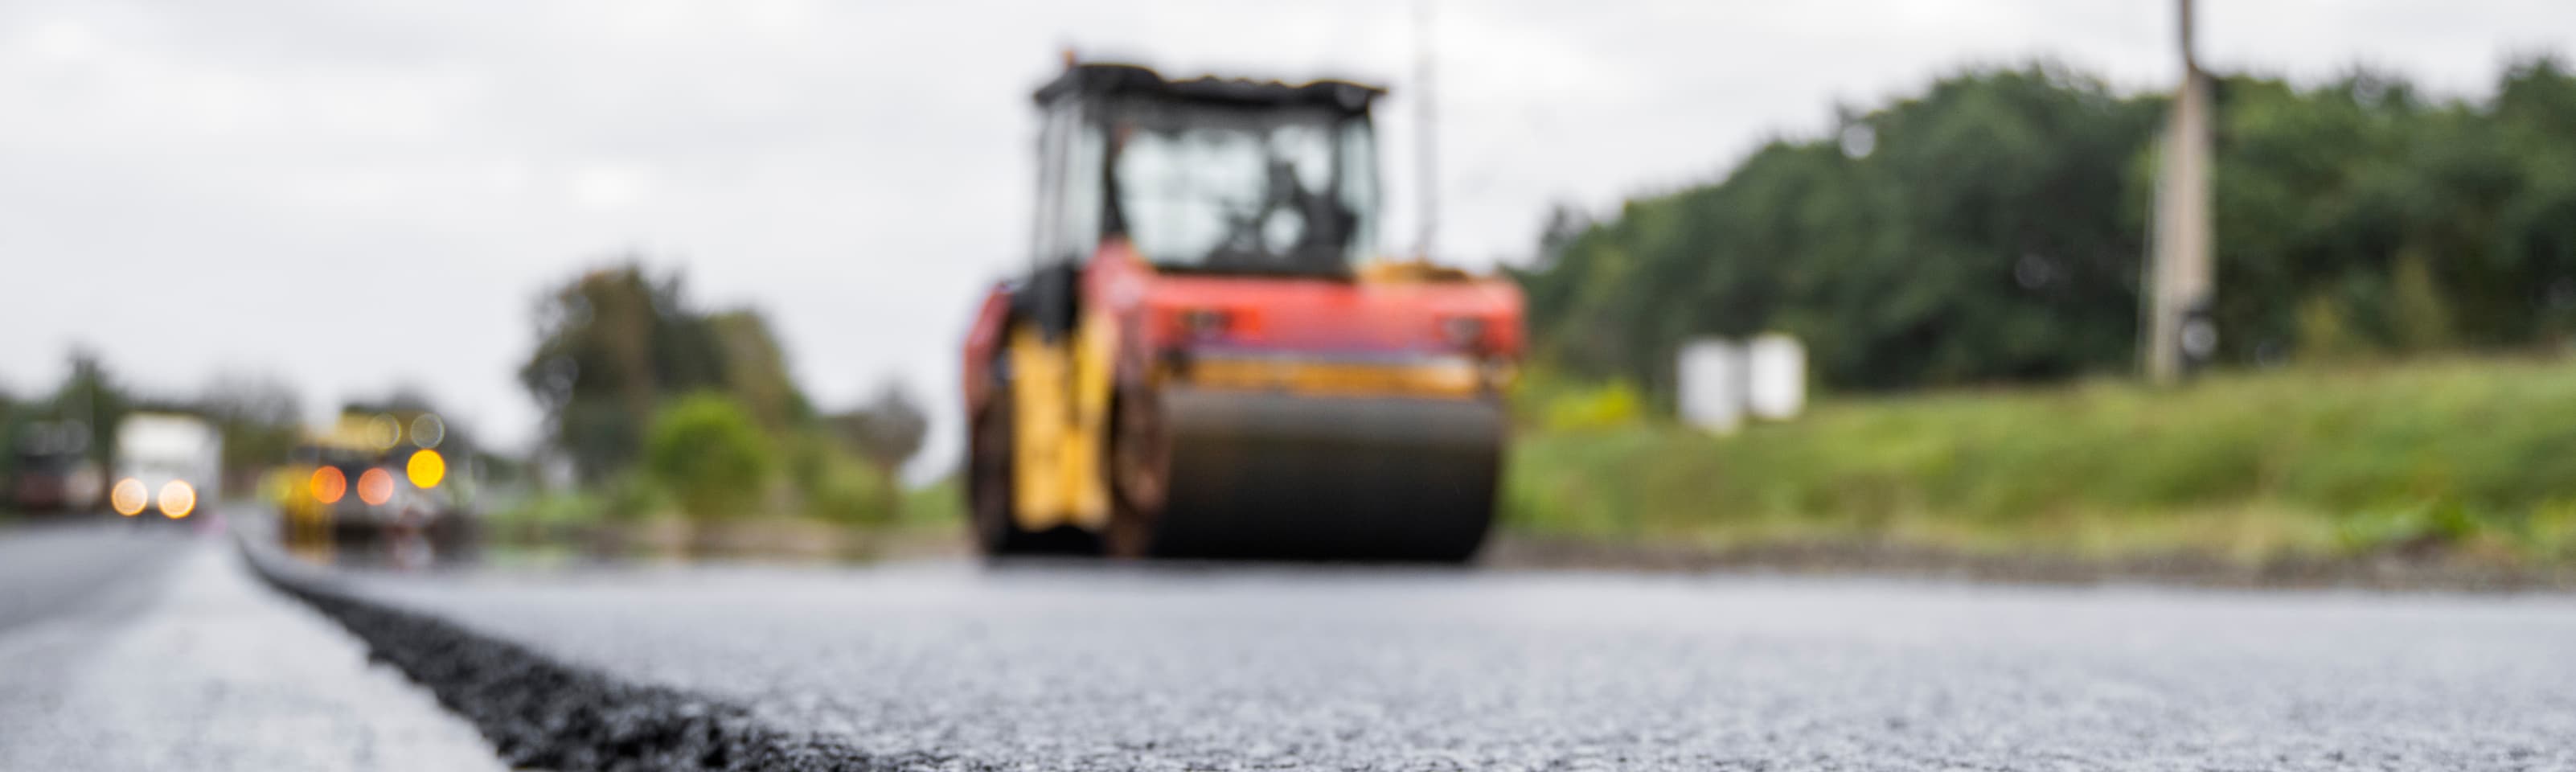 England paves the way with its largest road restoration program